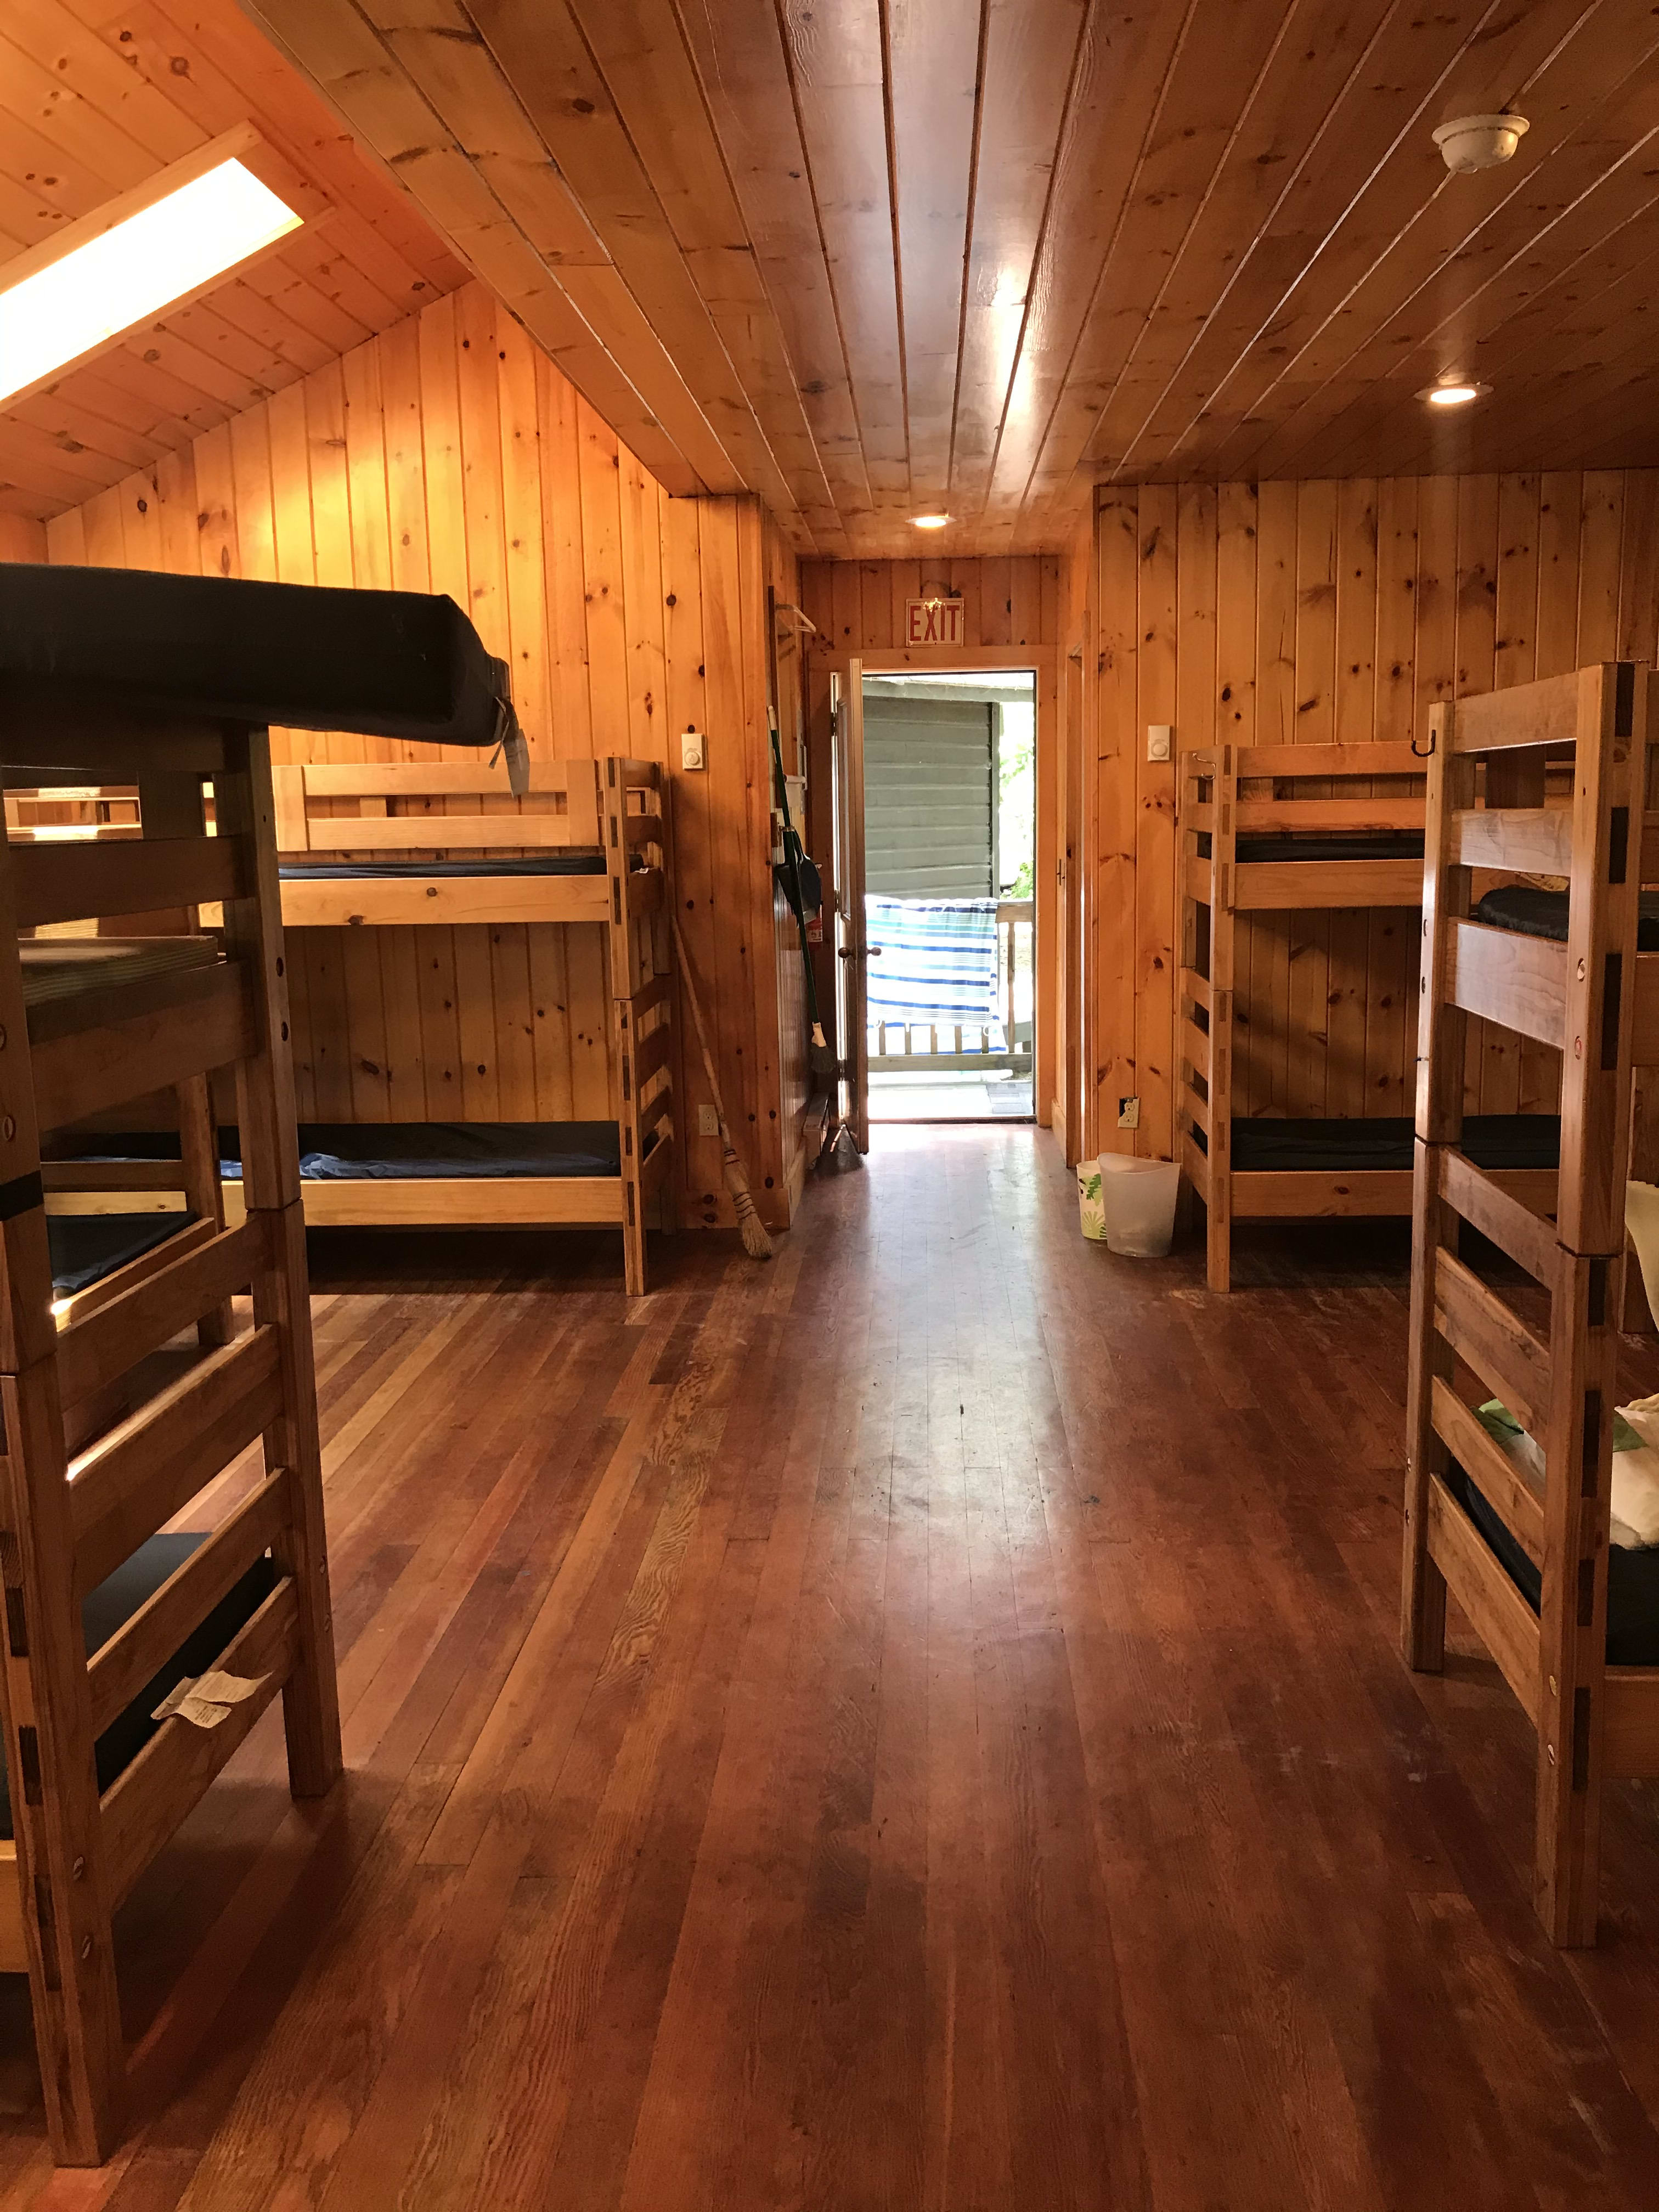 Chadwick is a pine lined cabin with hardwood flooring, bunk beds, skylights and a full private bath.